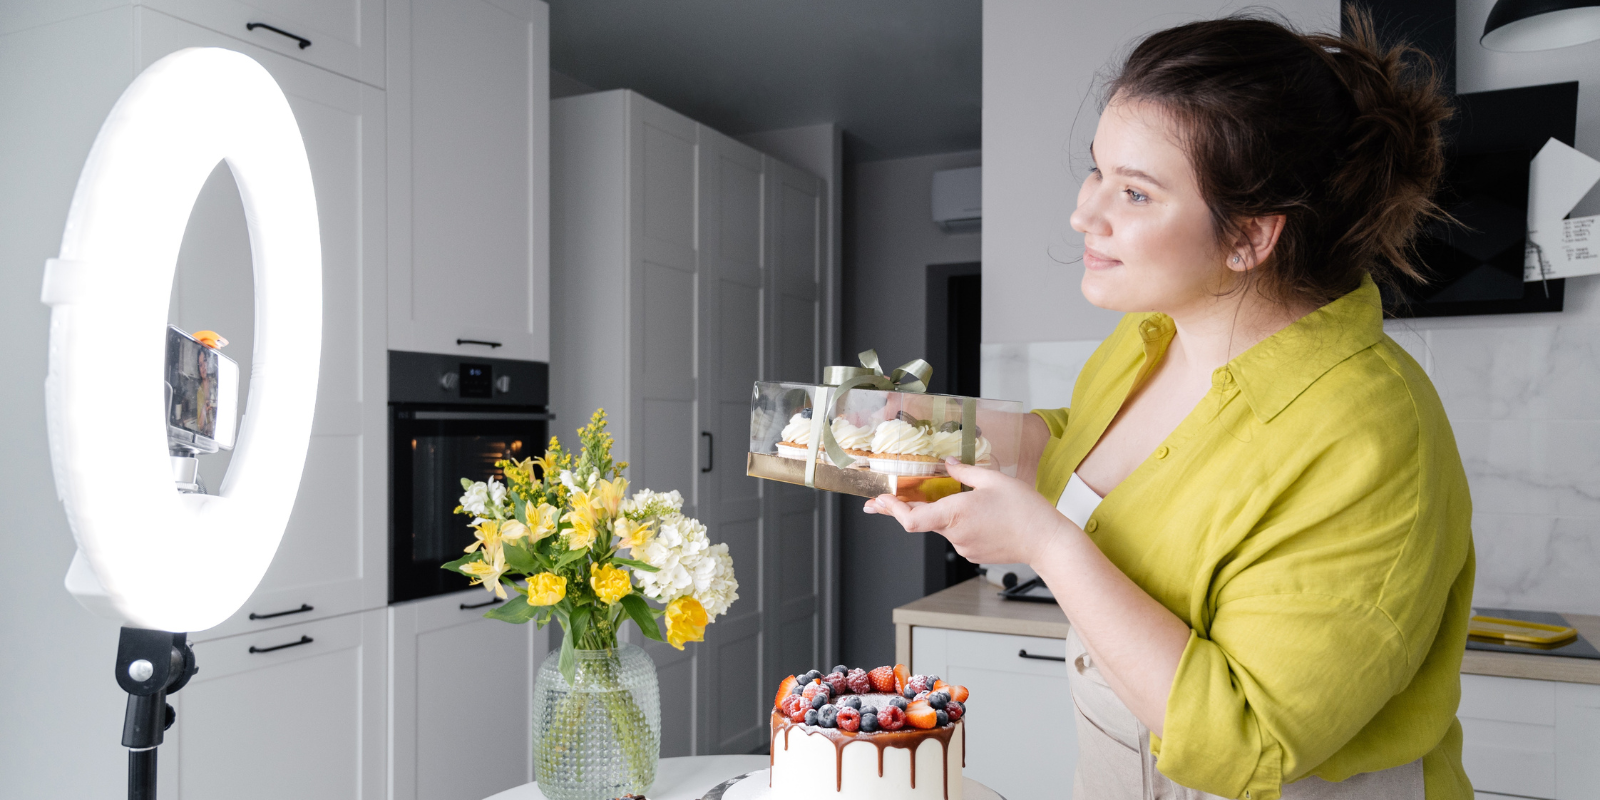 woman holding cupcakes in a kitchen in front of camera - how to find youtube influencers